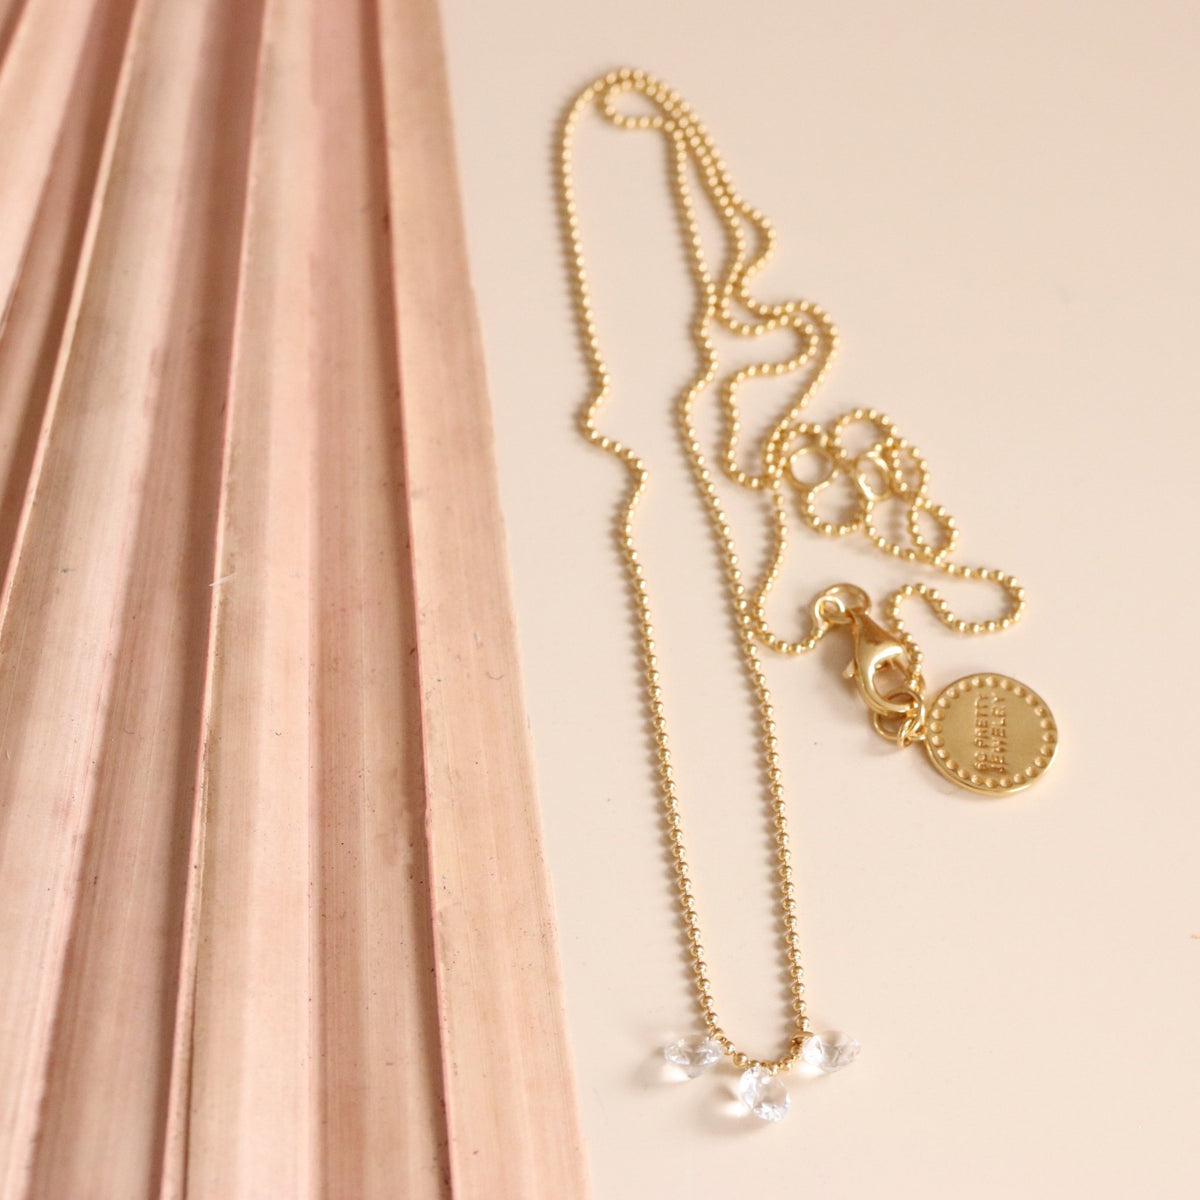 DAINTY RADIANT TRIO NECKLACE - CUBIC ZIRCONIA &amp; GOLD - SO PRETTY CARA COTTER